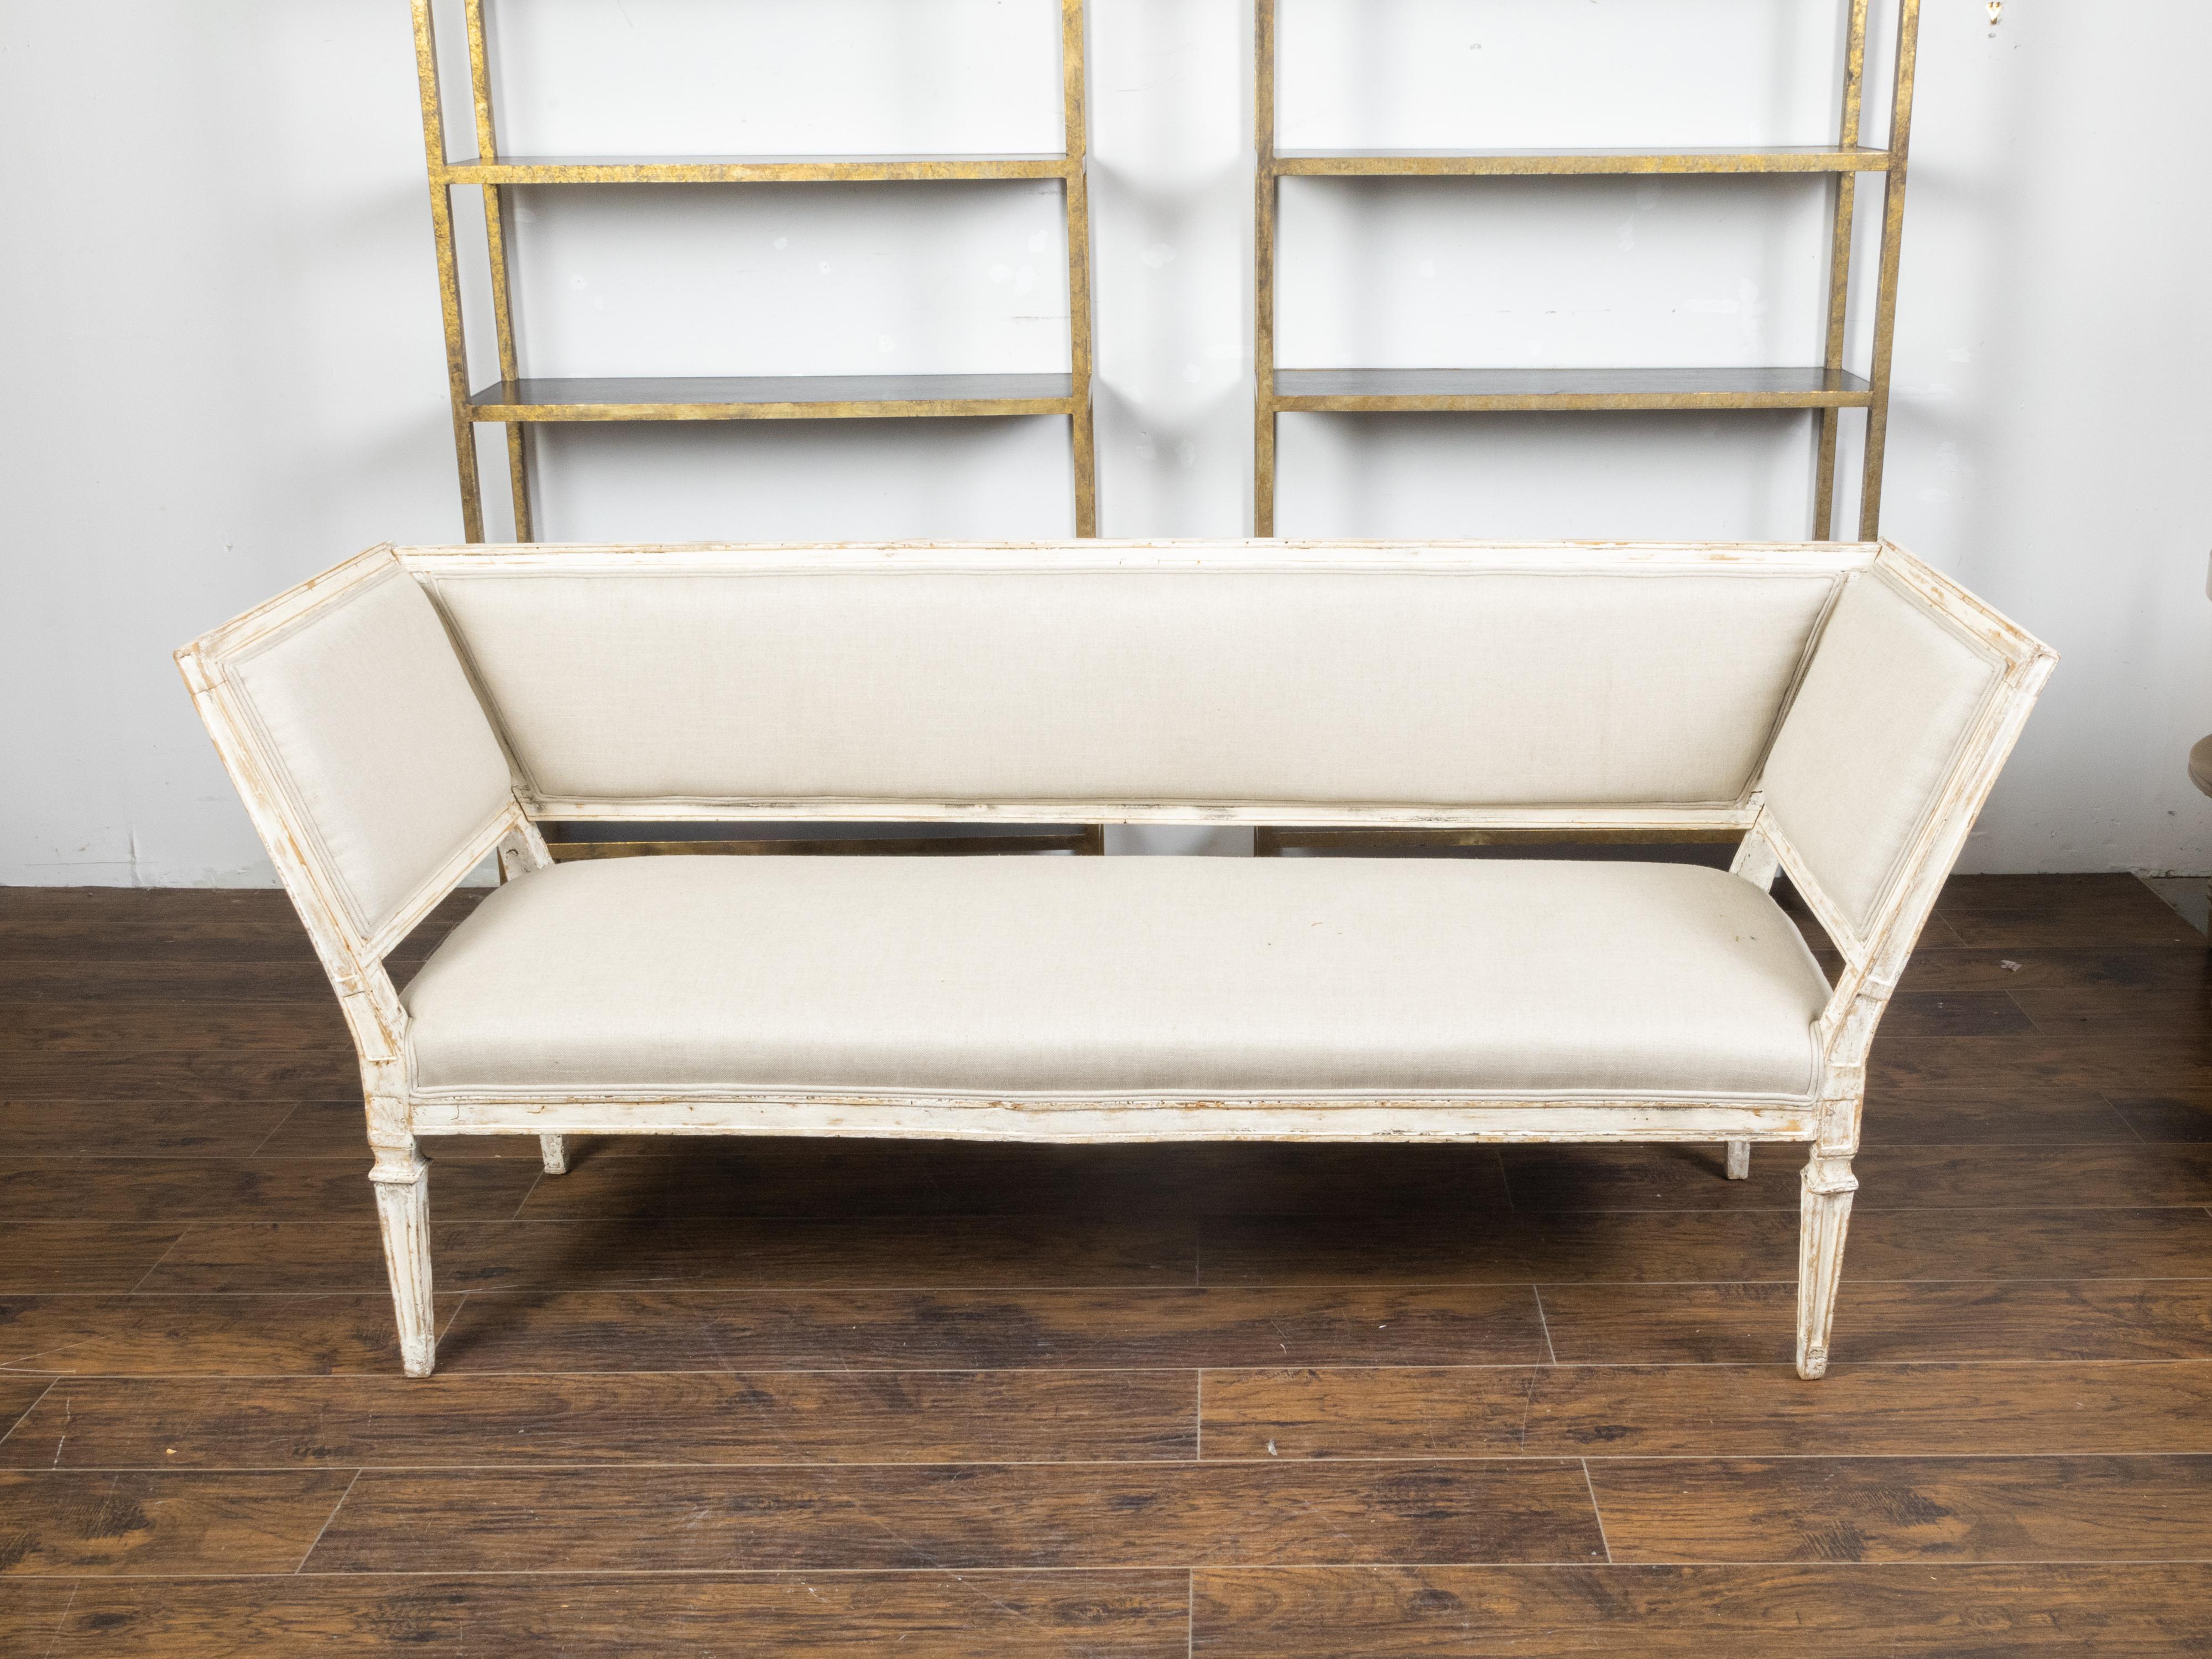 An Italian painted wood sofa from the 19th century, with two slanted sides, tapered carved legs and distressed patina. Created in Italy during the 19th century, this painted sofa features a straight back connected to two slanted sides, surrounding a